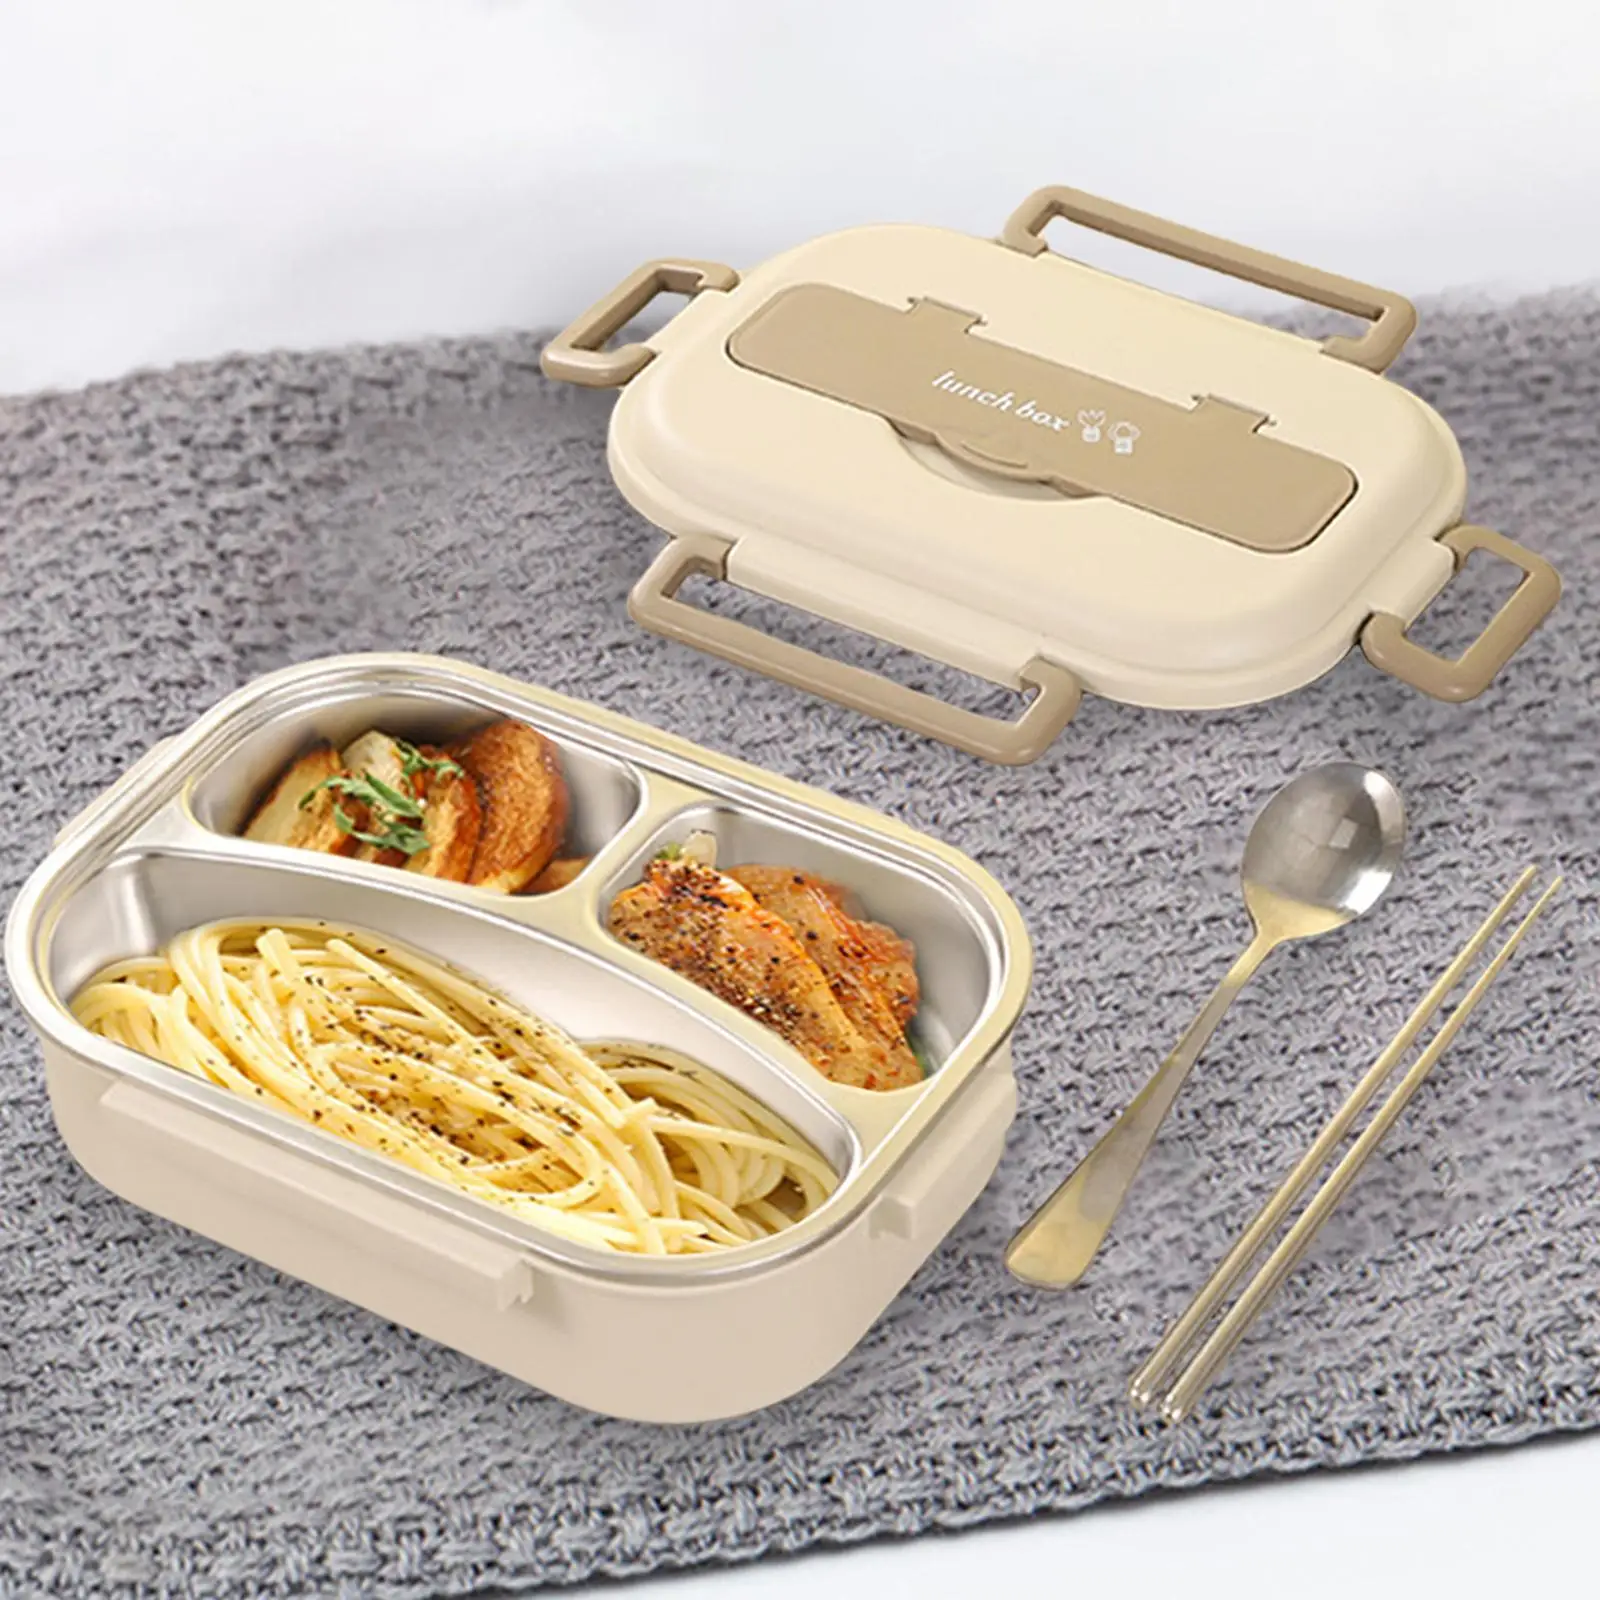 Bento Box Kids Adults Multi Purpose with Phone Stand Modern Lunch Container with Cutlery for Camp Office Hiking Travel Picnic